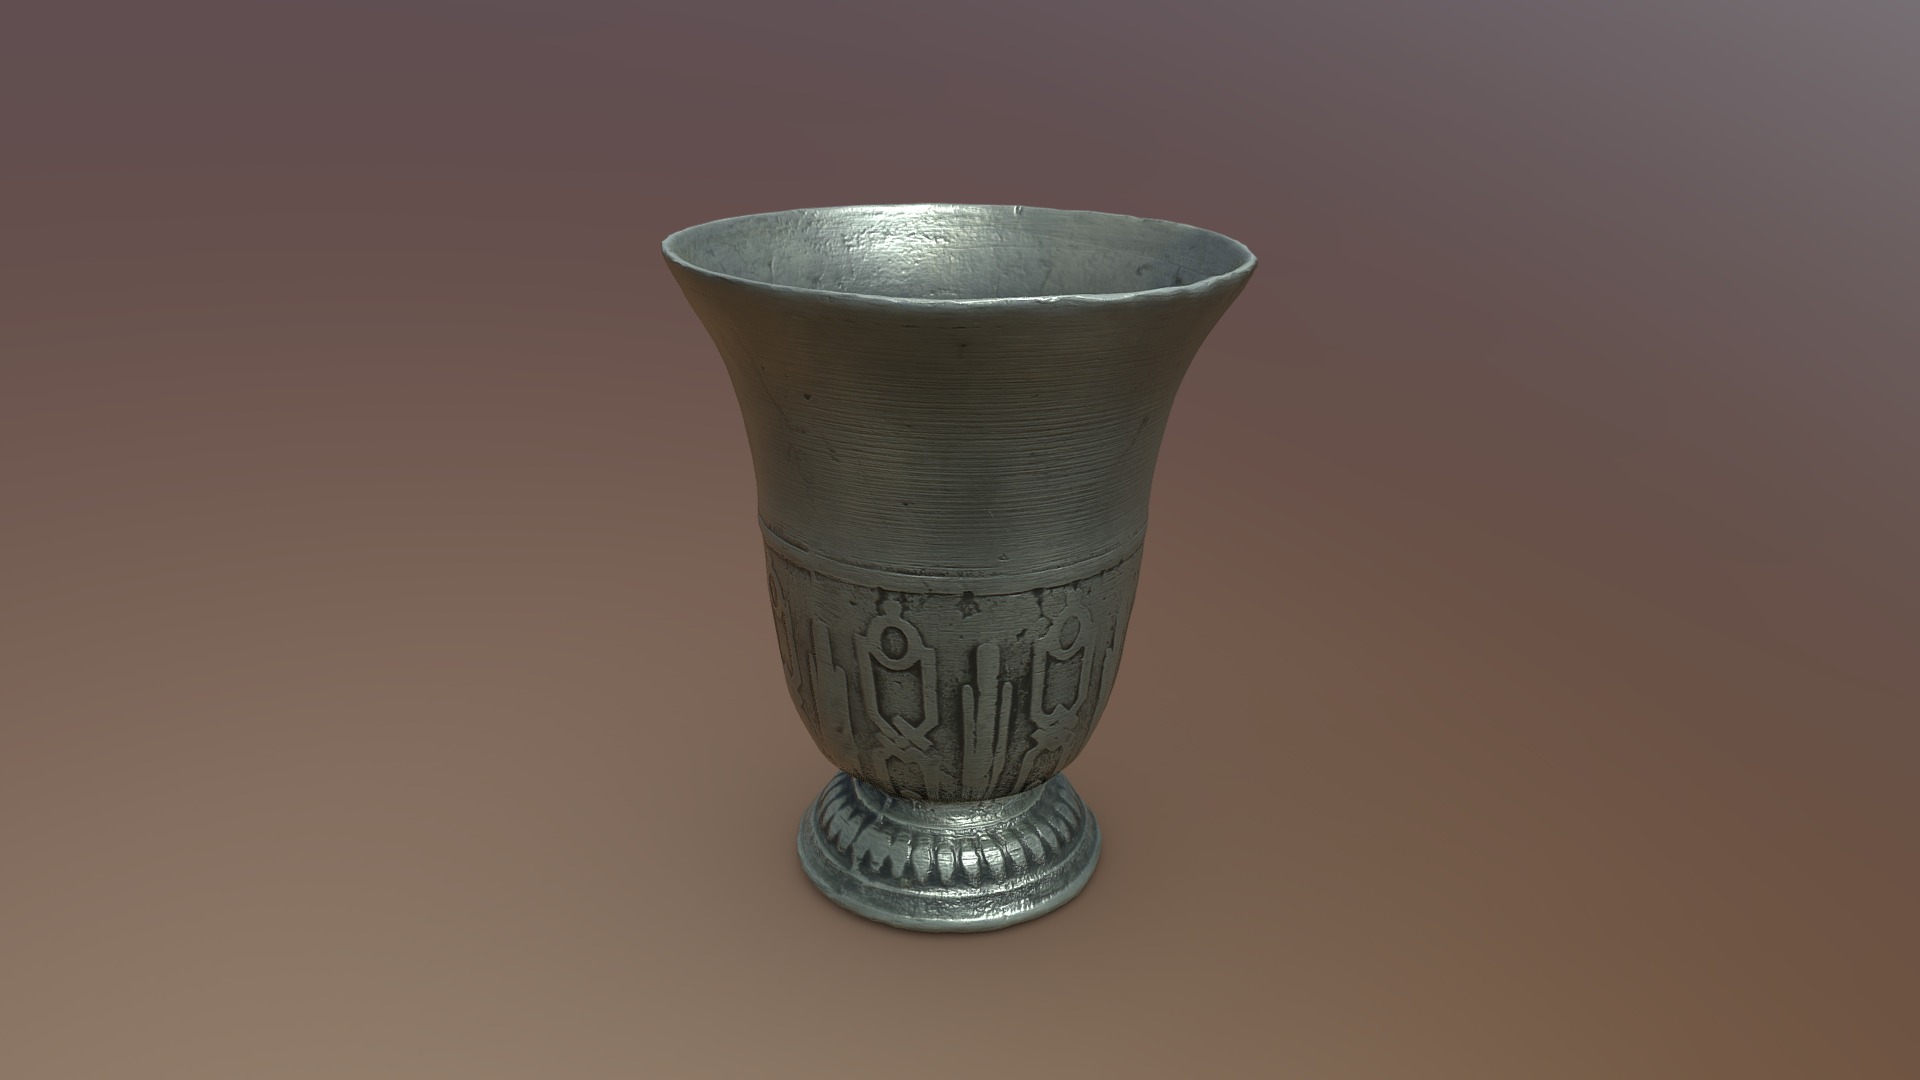 A pewter cup. Captured to help practice my skills on objects with difficult characteristics for 3D scanning. When shooting photos of the inside the rim was often out of focus due to depth of field (even at f11) and the shiny texture made the point cloud noisy. Filters and multiple shots (taken afterwards after processing of an initial photo set) helped get around these problems 3d model